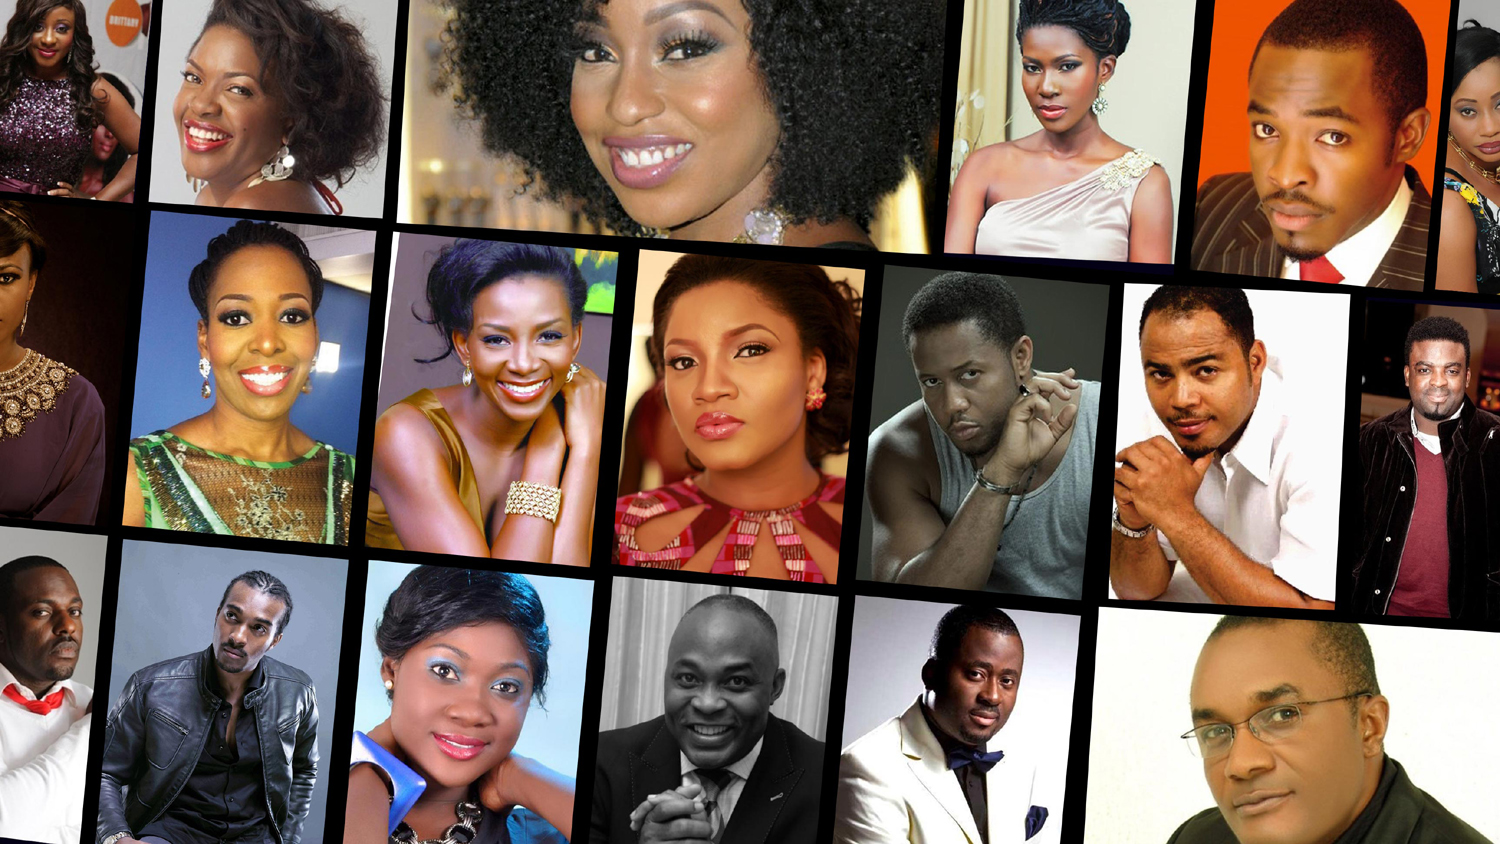 Nollywood's Who Is Who (Copyright: Nollywood Networks www.nollywoodnetworks.org)